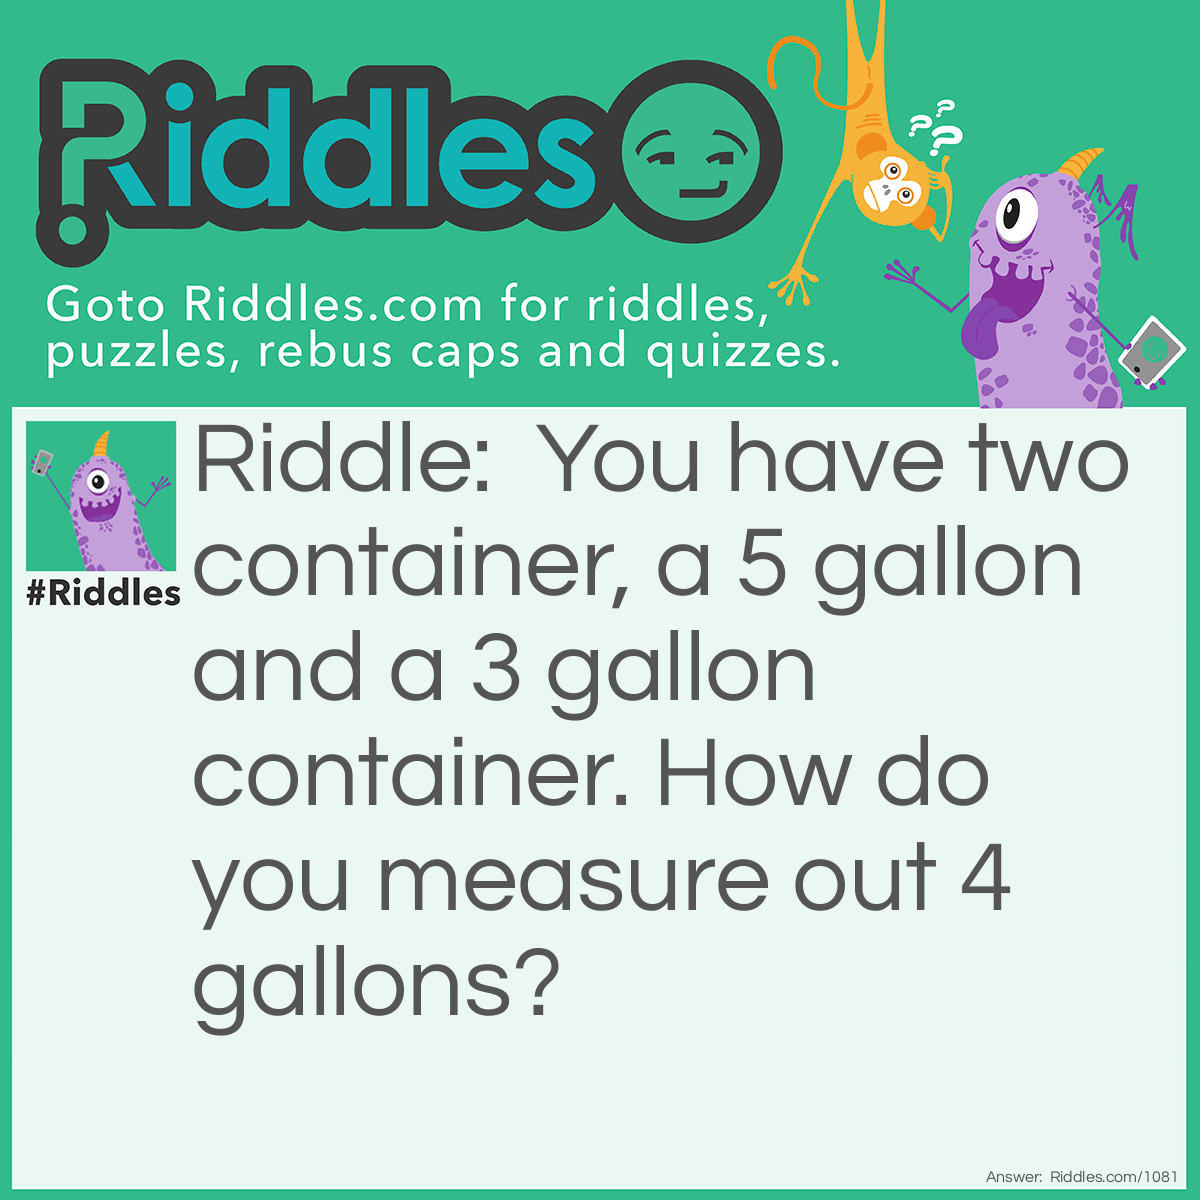 Riddle: You have two container, a 5 gallon and a 3 gallon container. How do you measure out 4 gallons? Answer: Fill up the 3 gallon container and pour the 3 gallons into the 5 gallon container.Then, fill the 3 gallon container back up, and pour it into the 5 gallon container.The 3 gallon container will have 1 gallon left. Empty the 5 gallon container.Pour the remining 1 gallon into the 5 gallon container.Then fill the 3 gallon container back up and pour it into the 5 gallon container.Thus, you have 4 gallons.